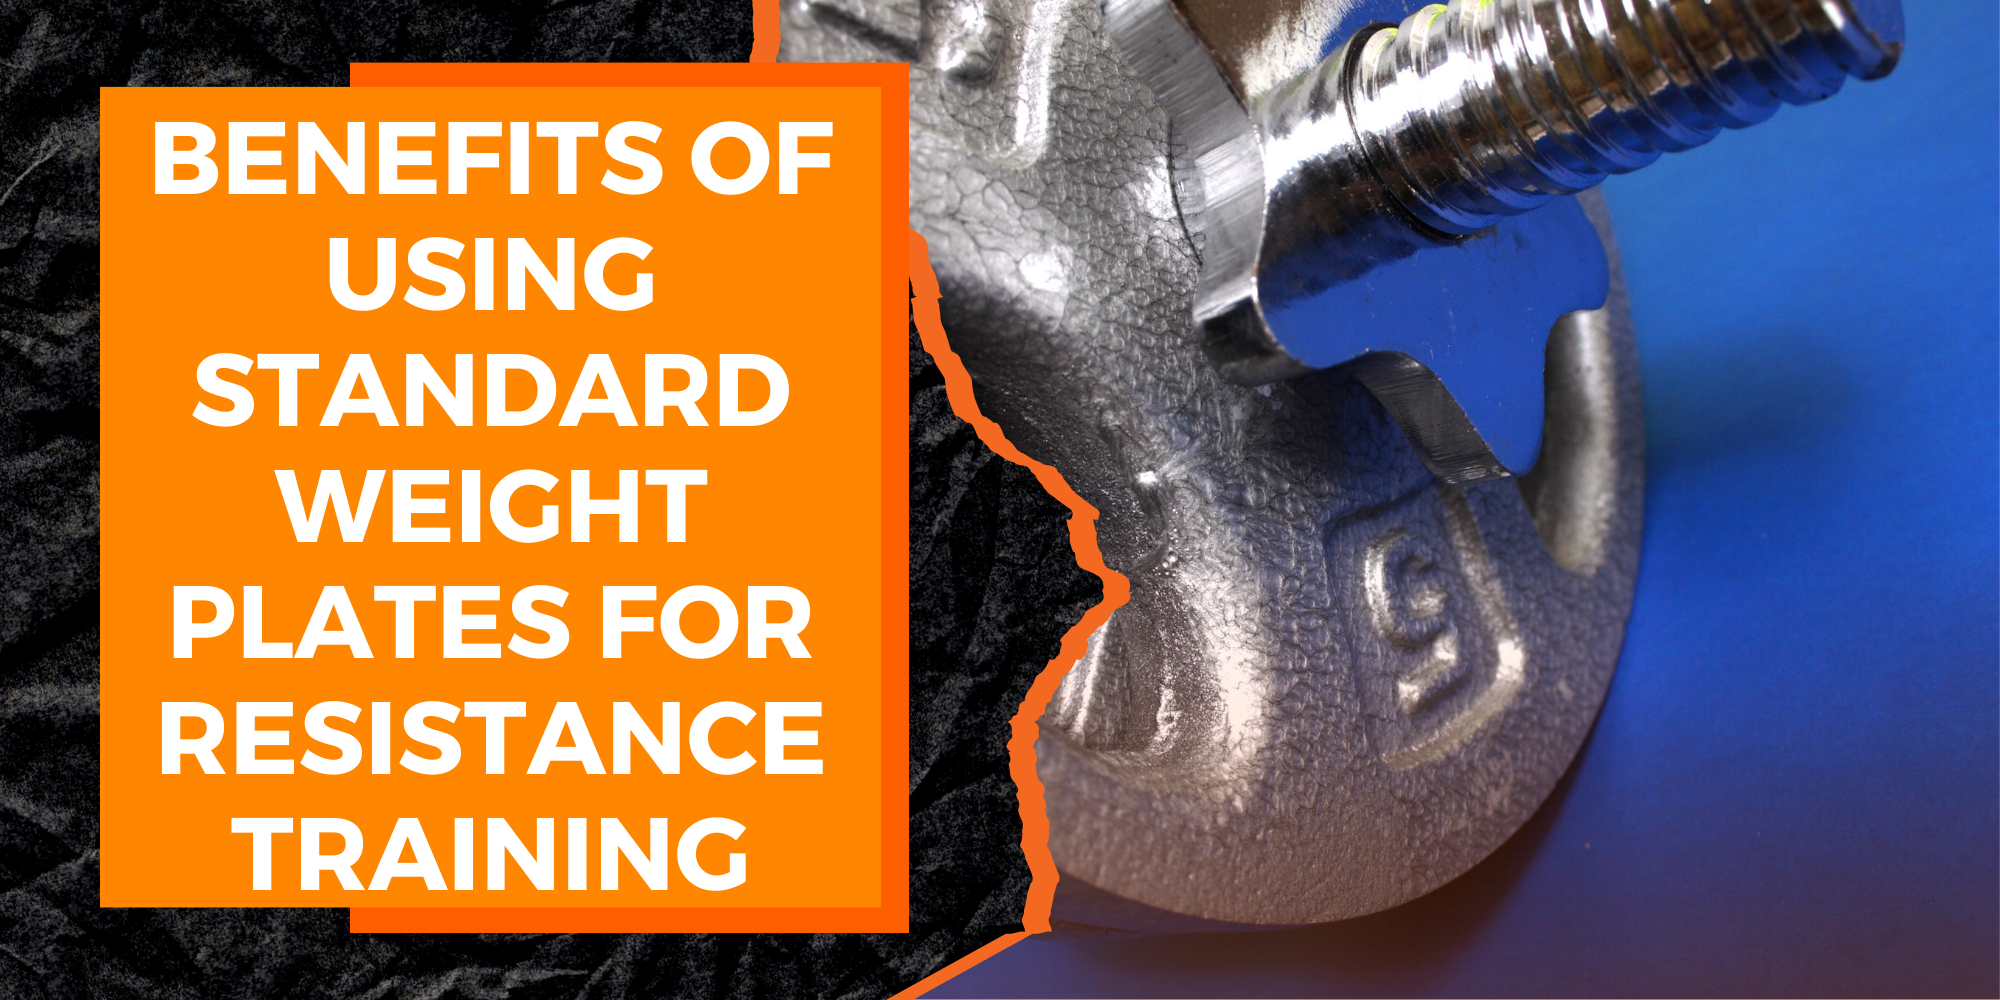 Benefits of Using Standard Weight Plates for Resistance Training